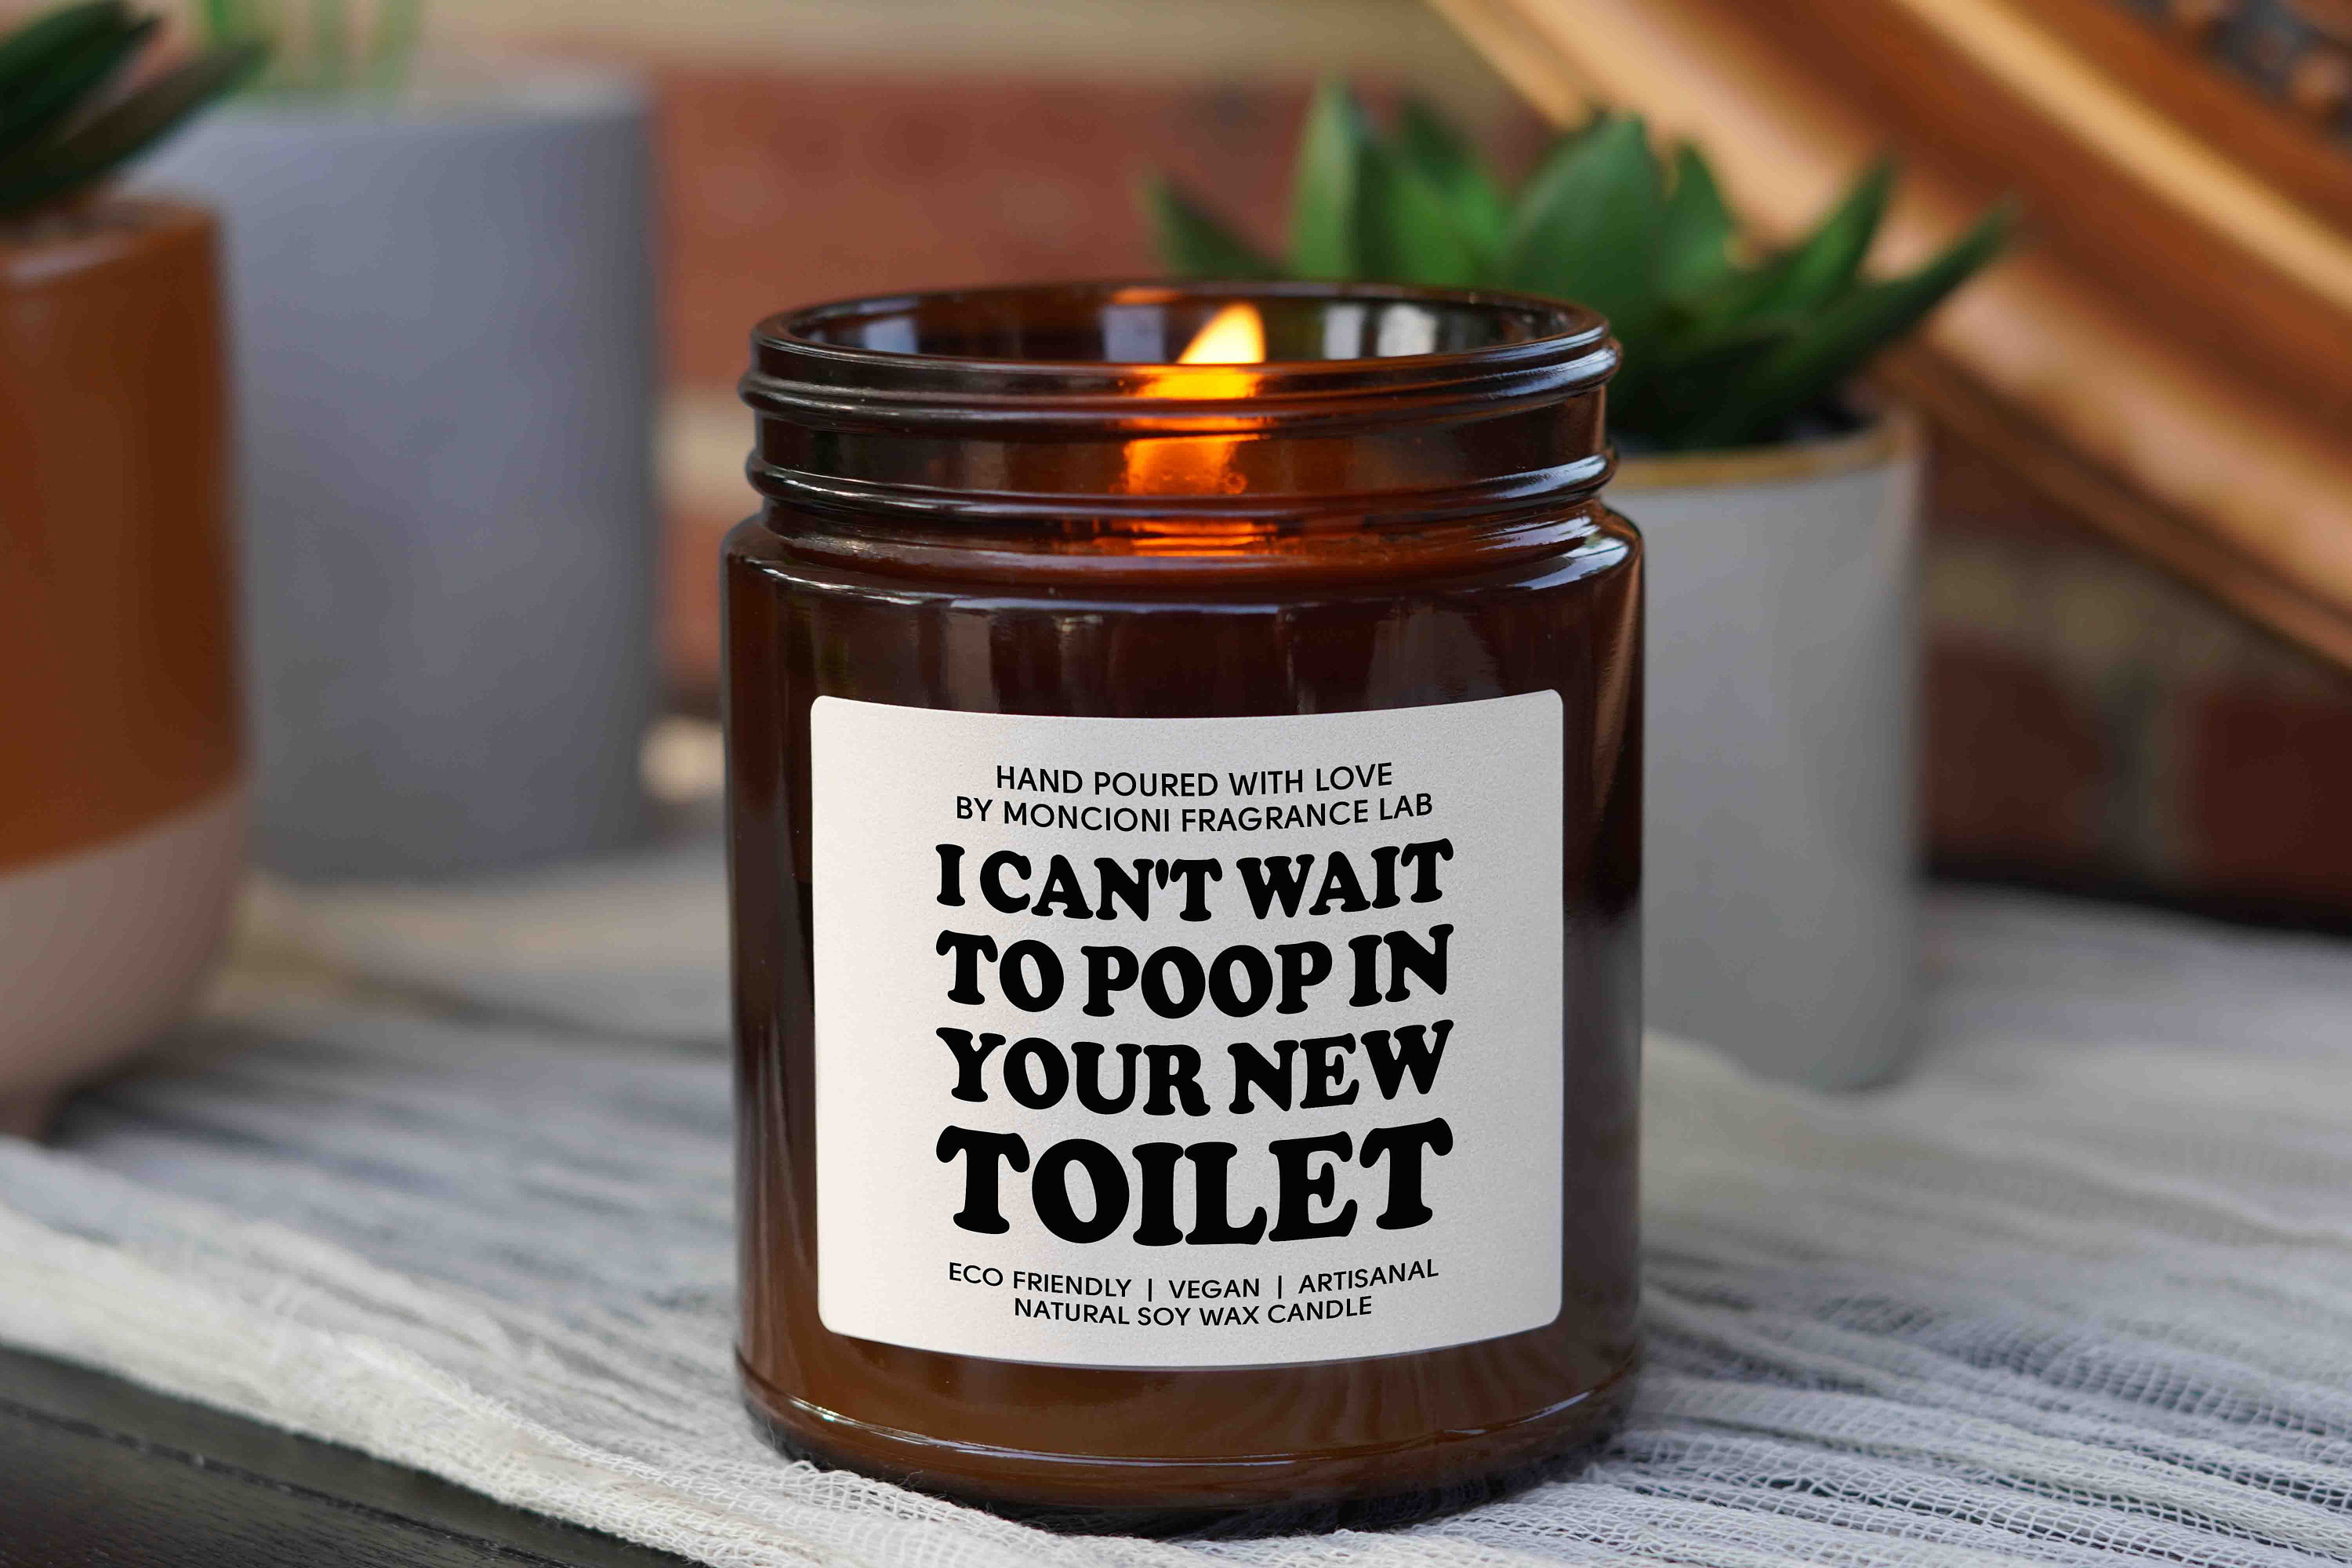 Replying to @ugcila bathroom finds for our NEW HOME, including